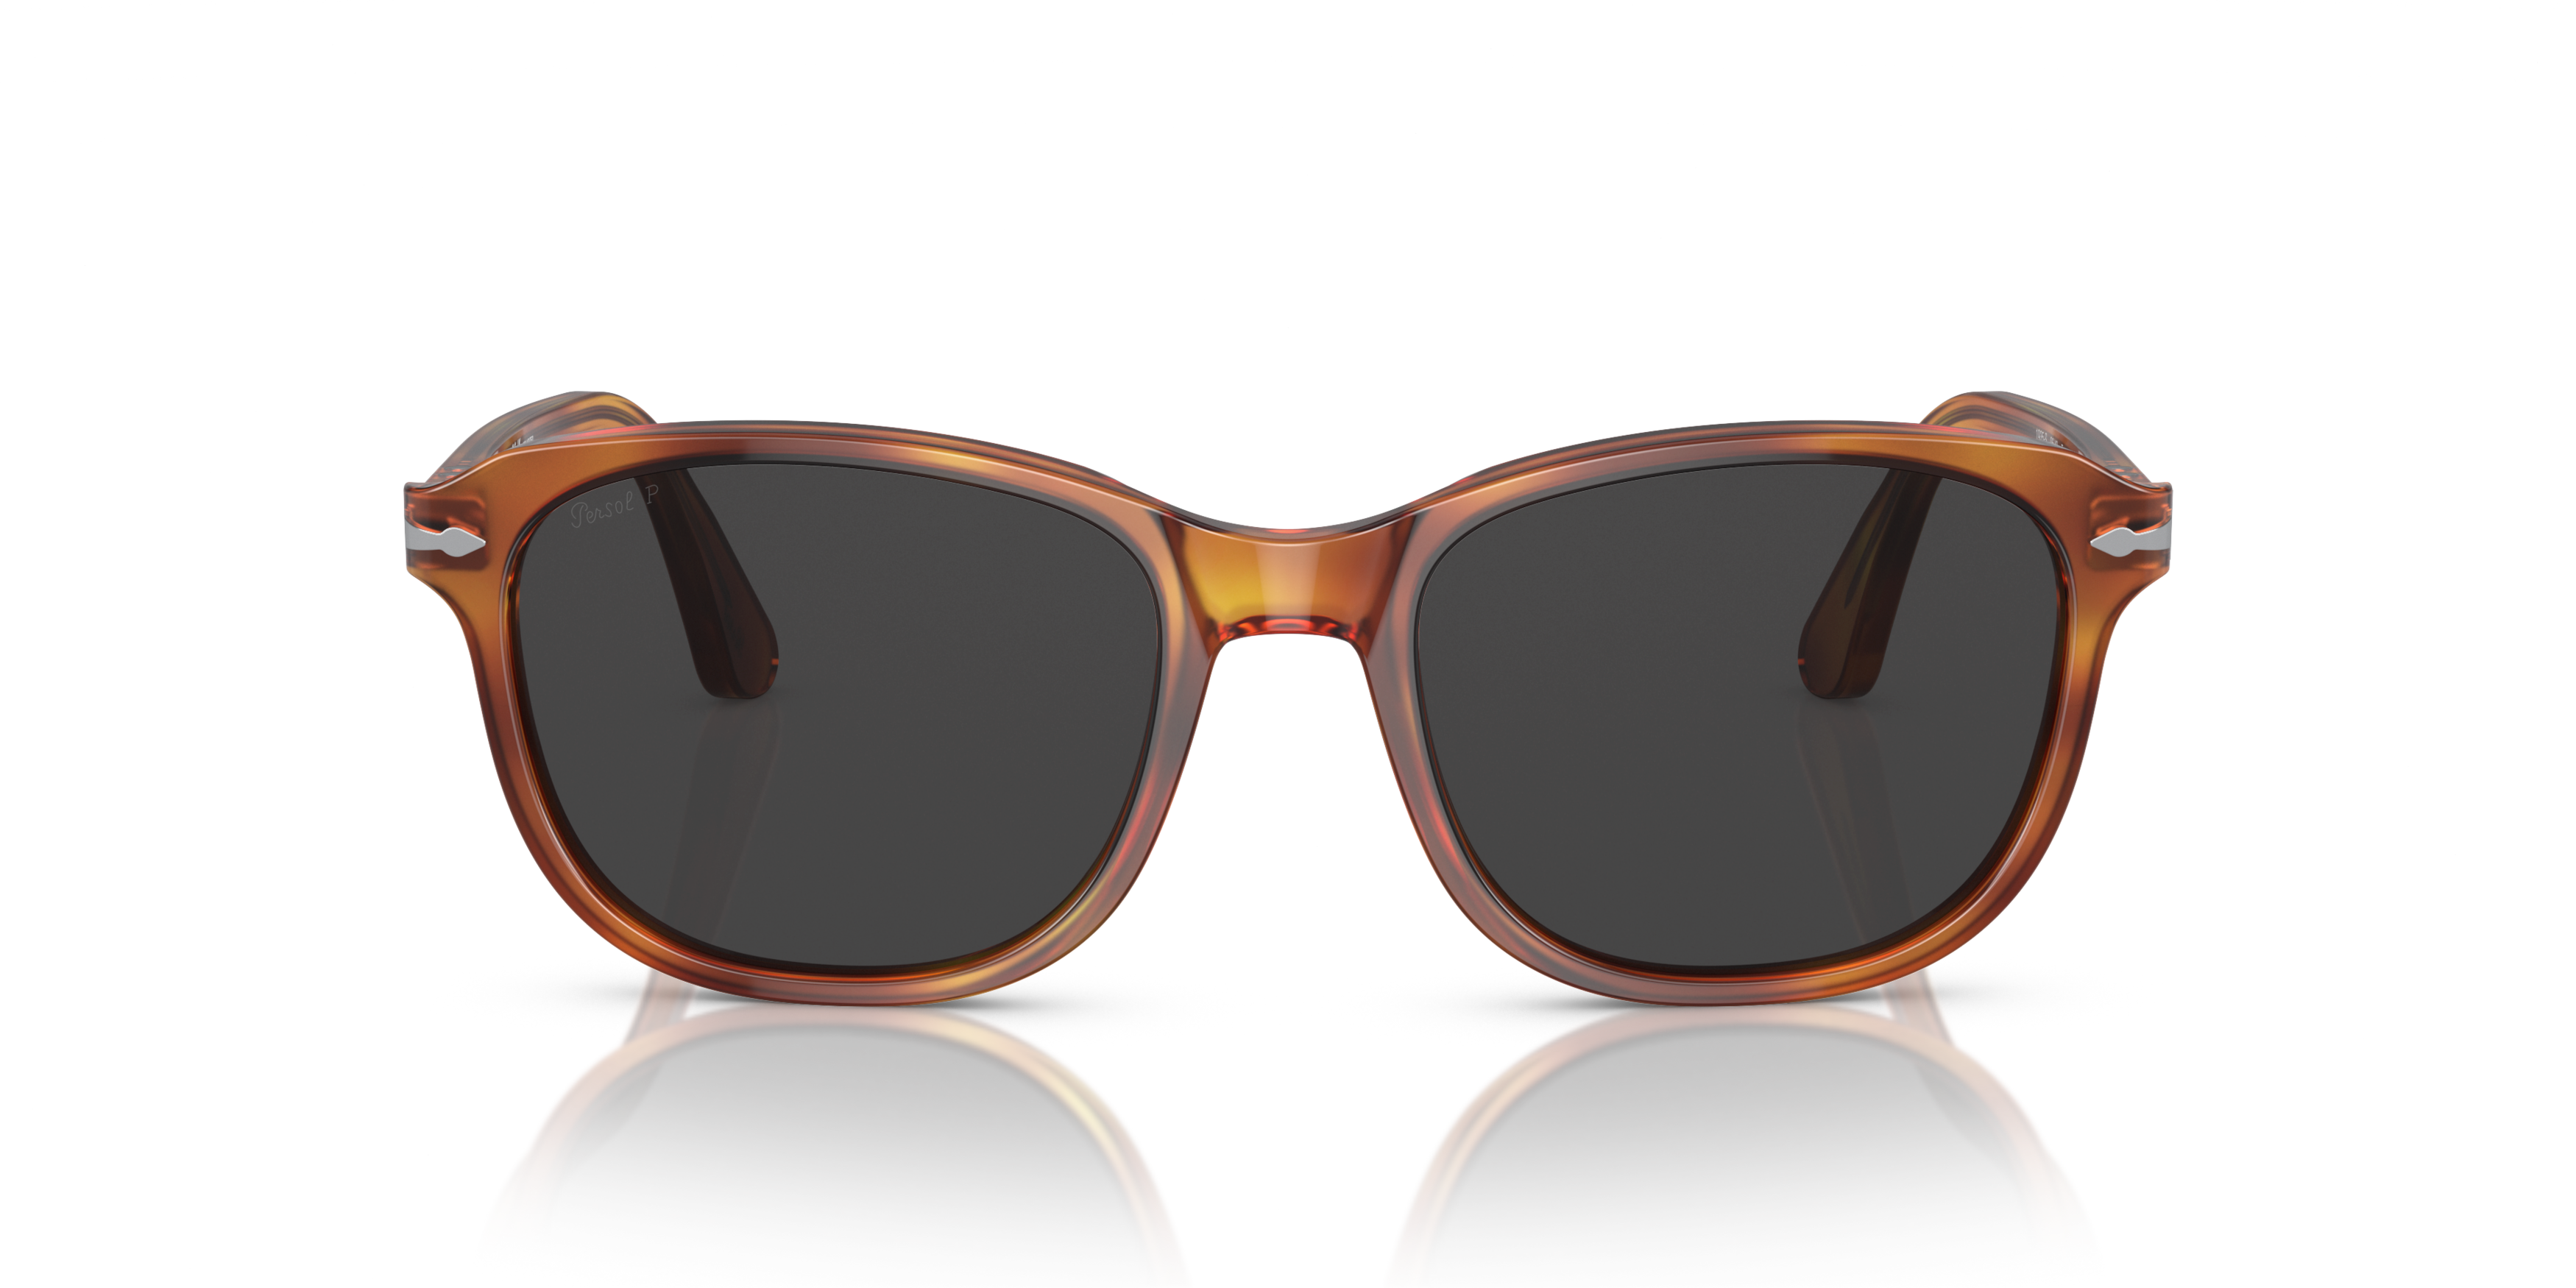 [products.image.front] Persol 0PO1935S 96/48